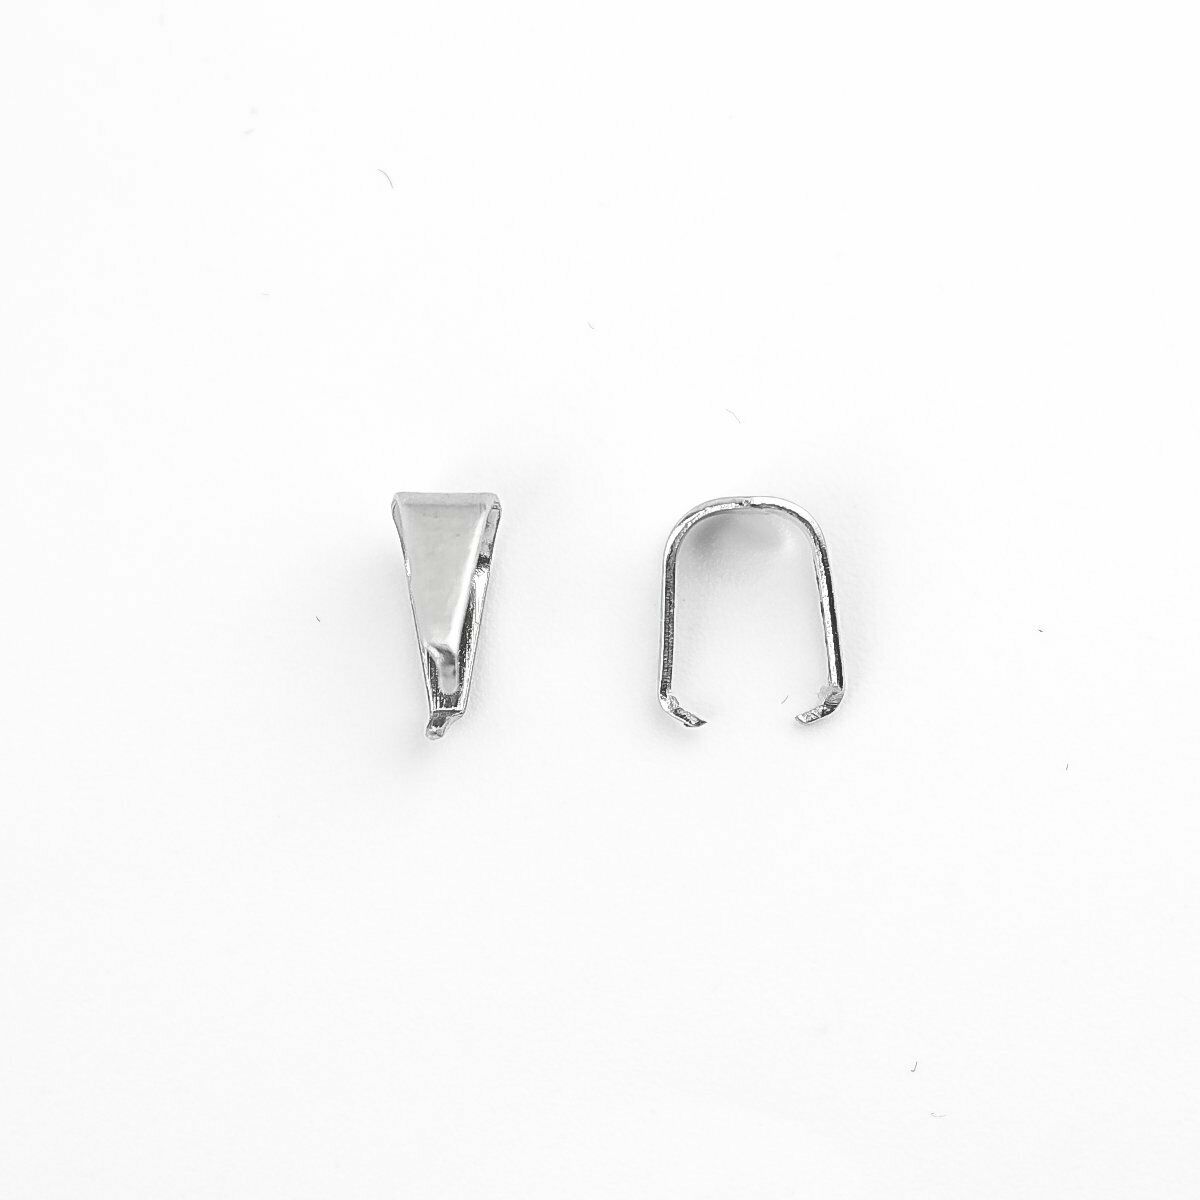 25 Stainless Steel Pendant Pinch Bails Clasps U-shaped Silver Tone 7x5mm